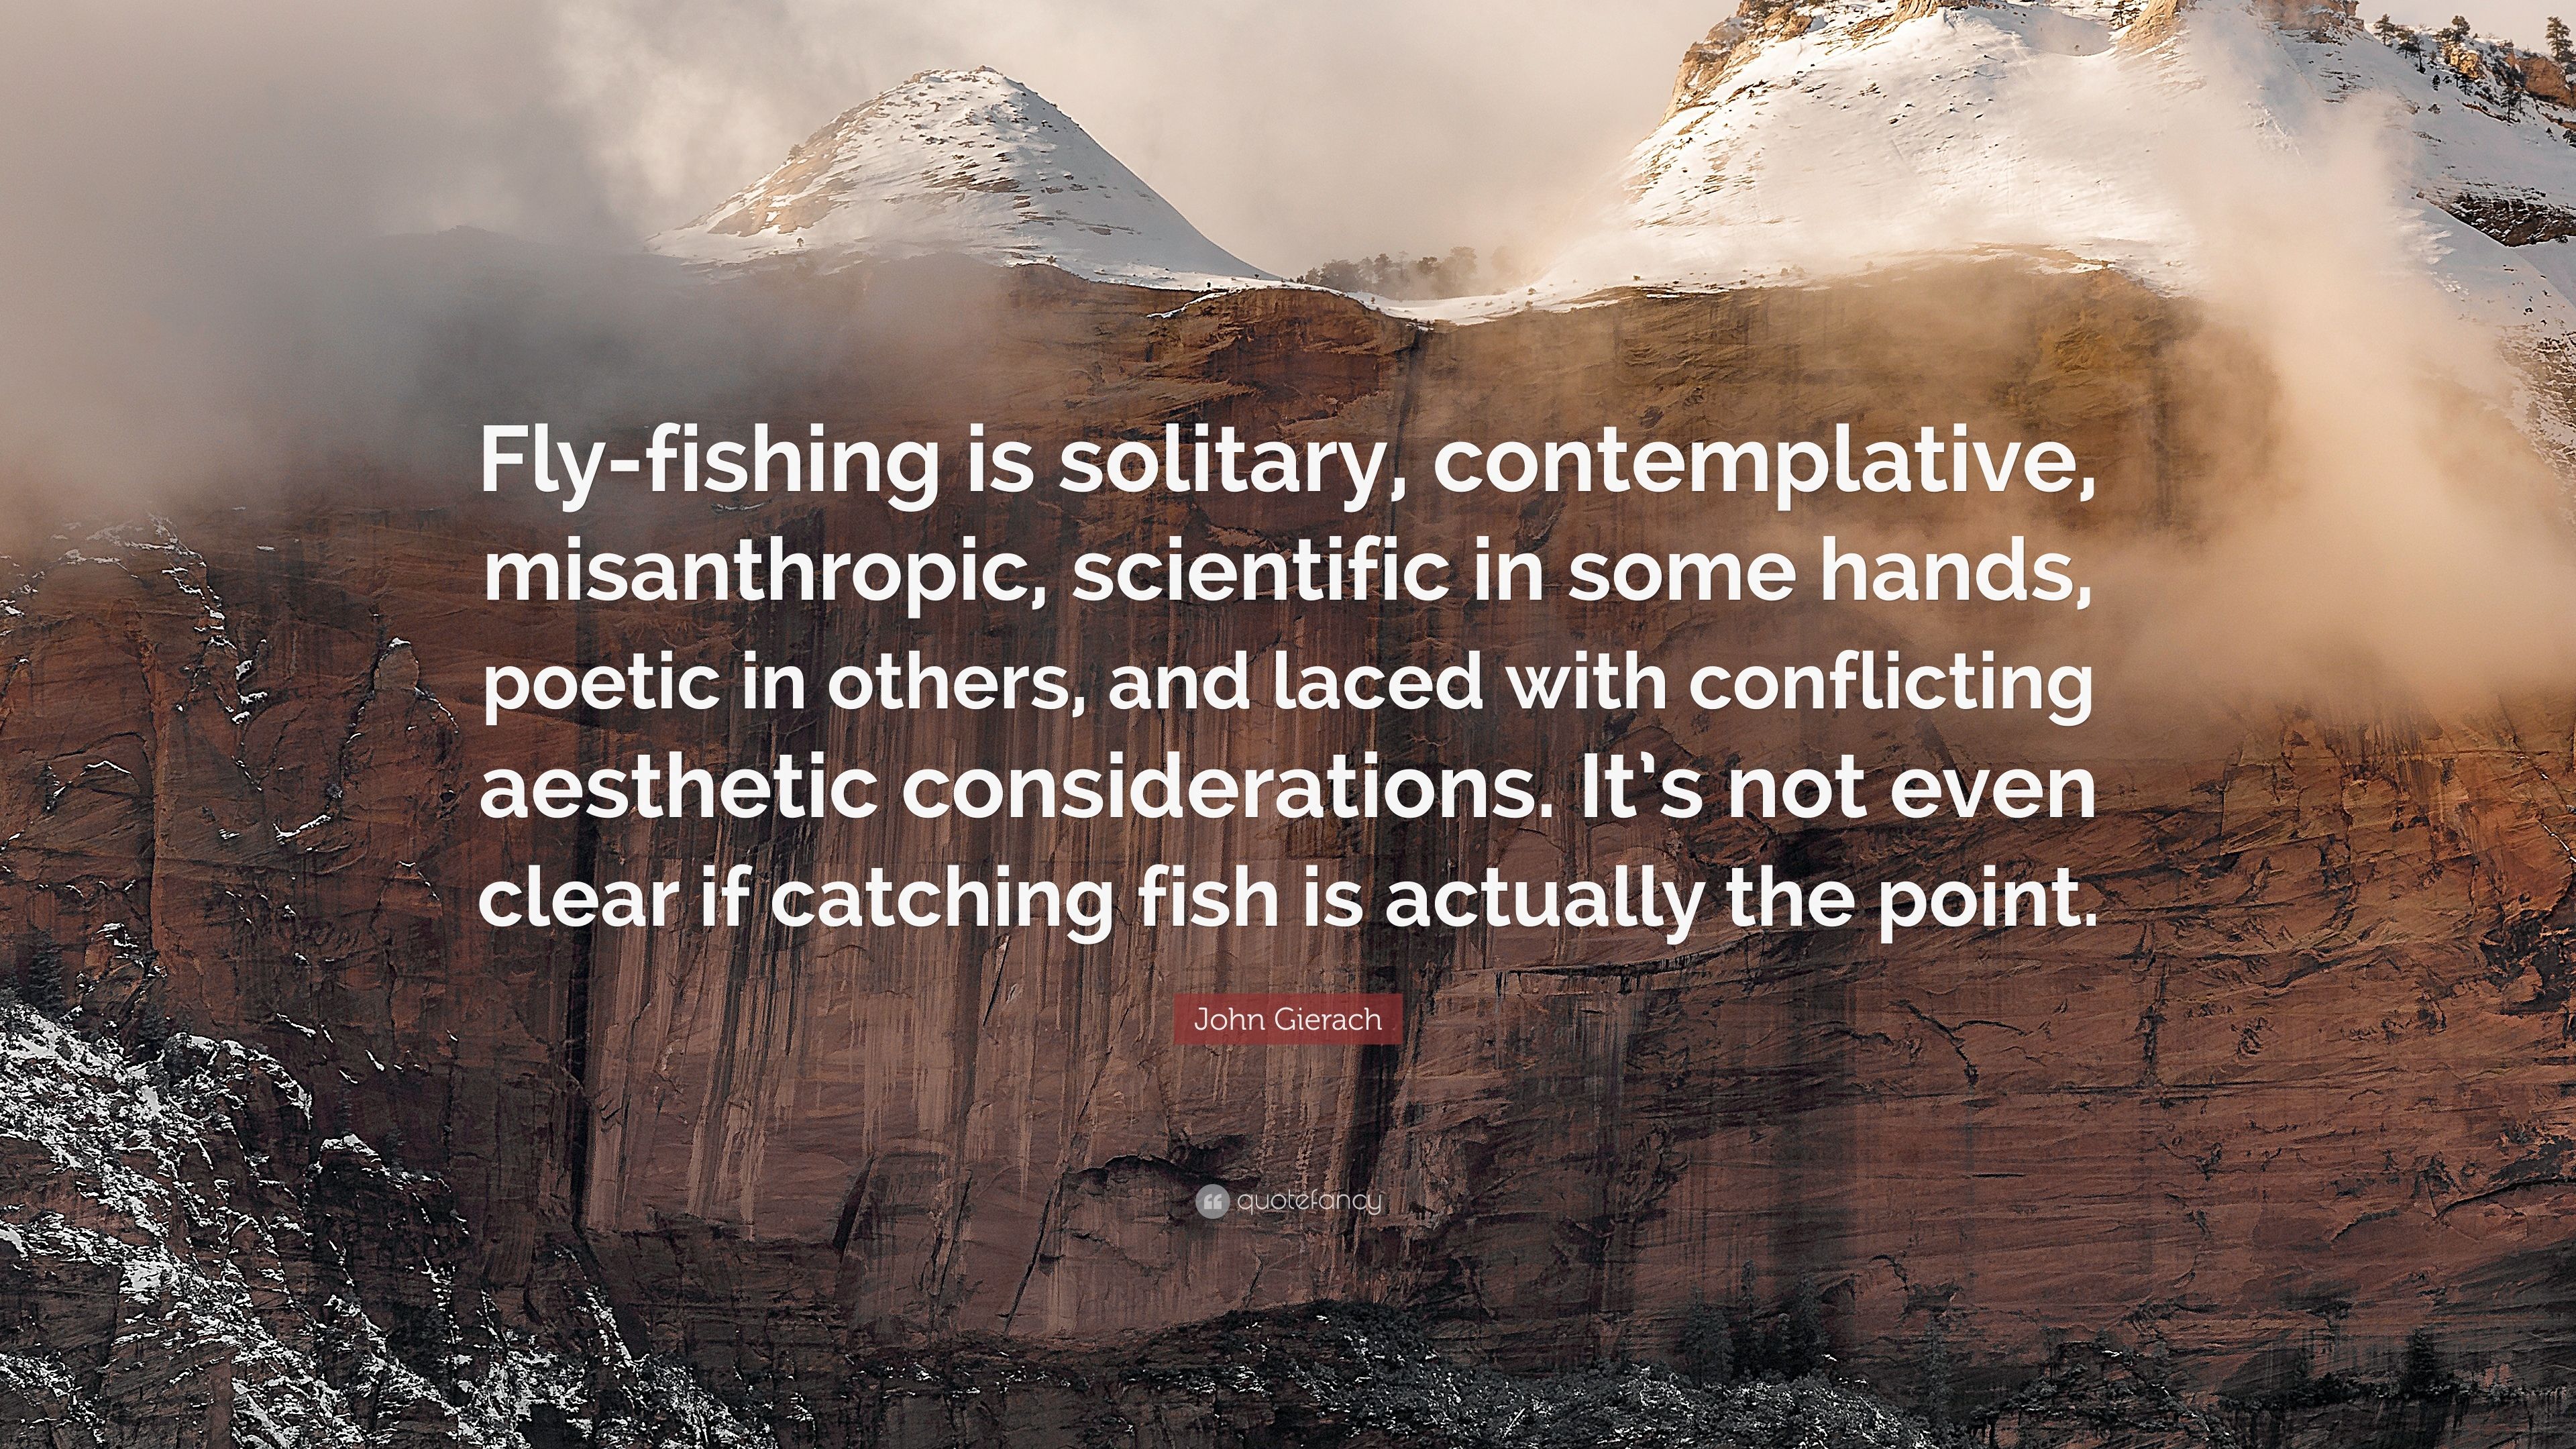 John Gierach Quote: “Fly Fishing Is Solitary, Contemplative